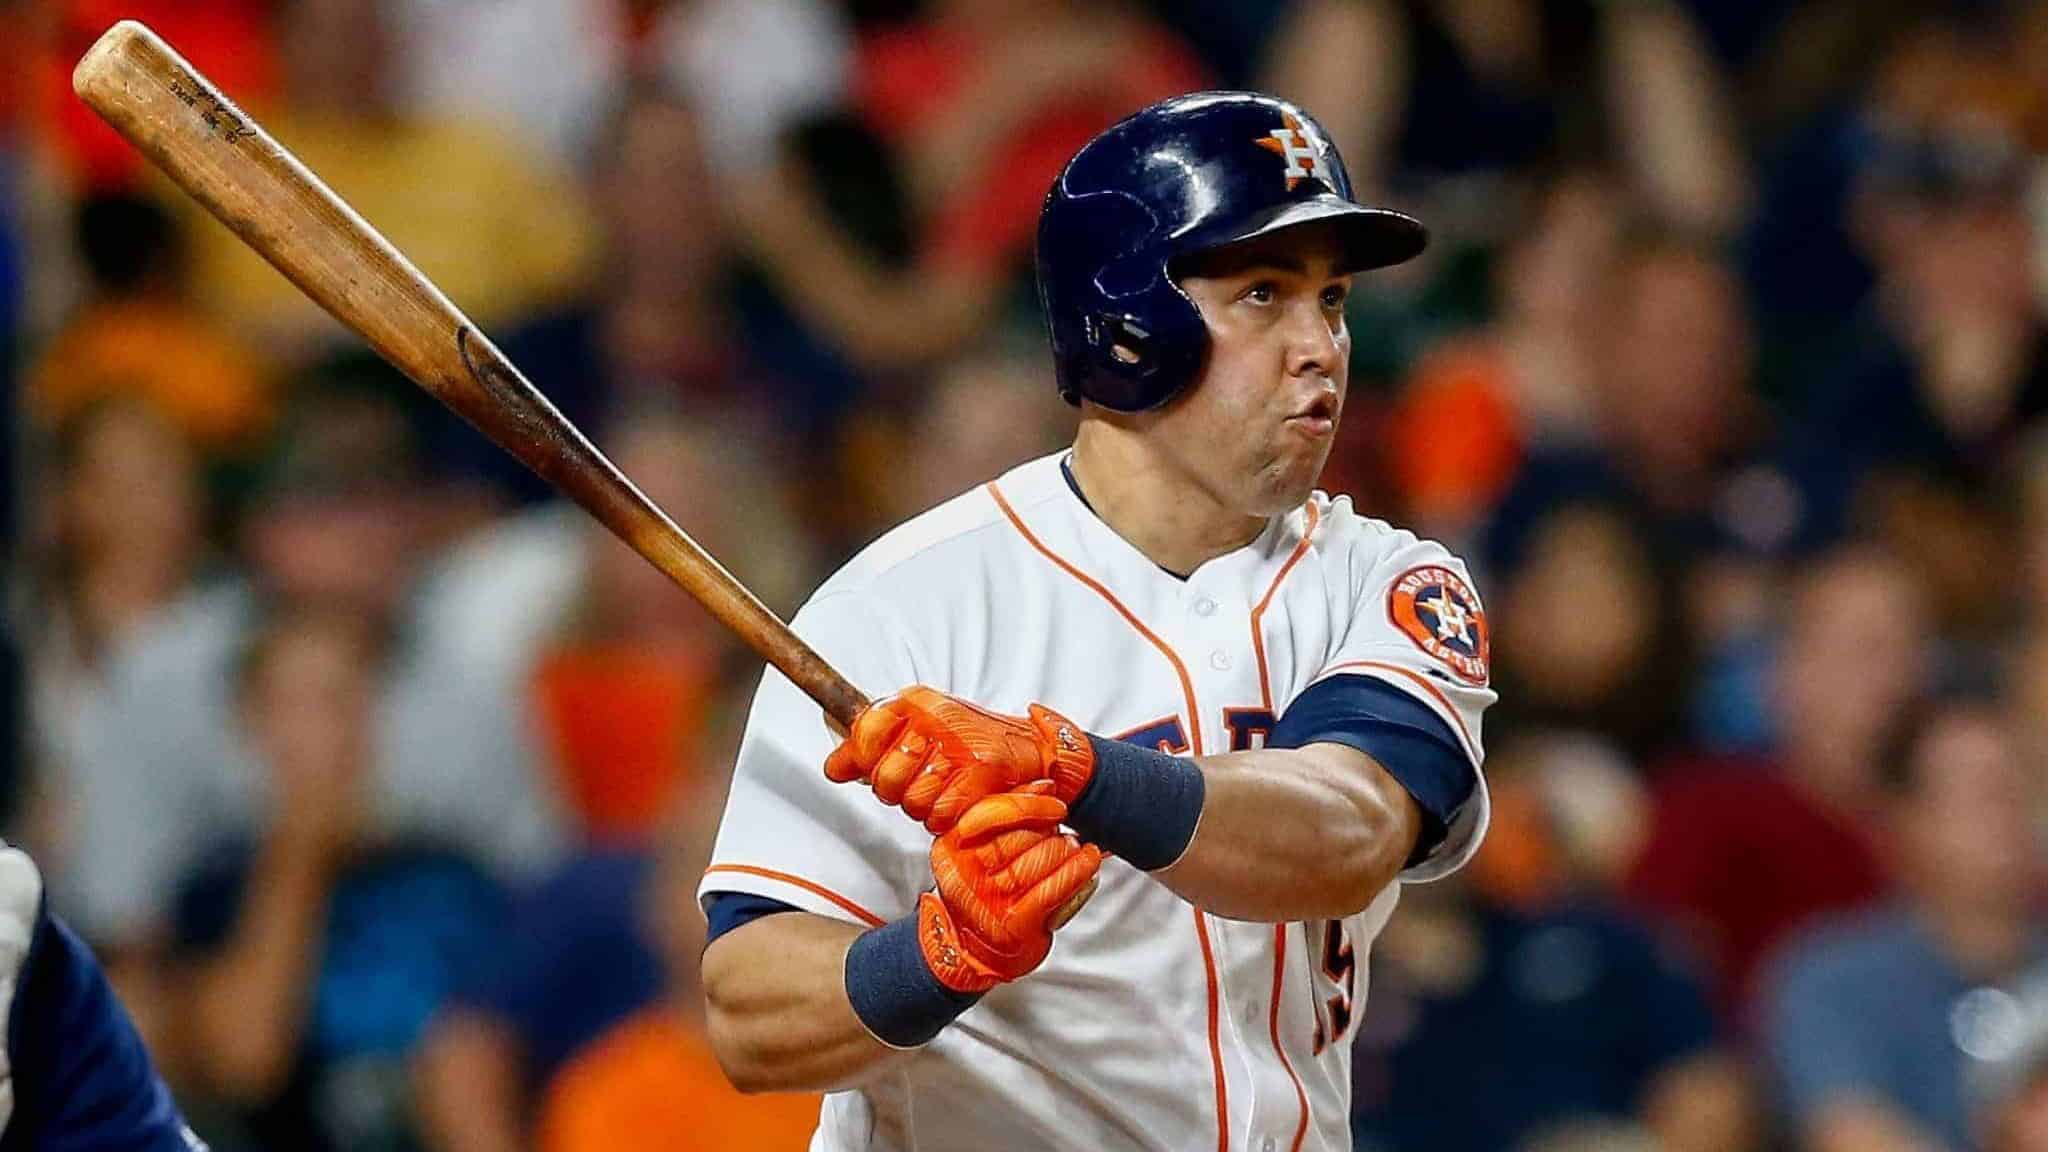 HOUSTON, TX - AUGUST 01: Carlos Beltran #15 of the Houston Astros hits a home run in the fifth inning against the Tampa Bay Rays at Minute Maid Park on August 1, 2017 in Houston, Texas.